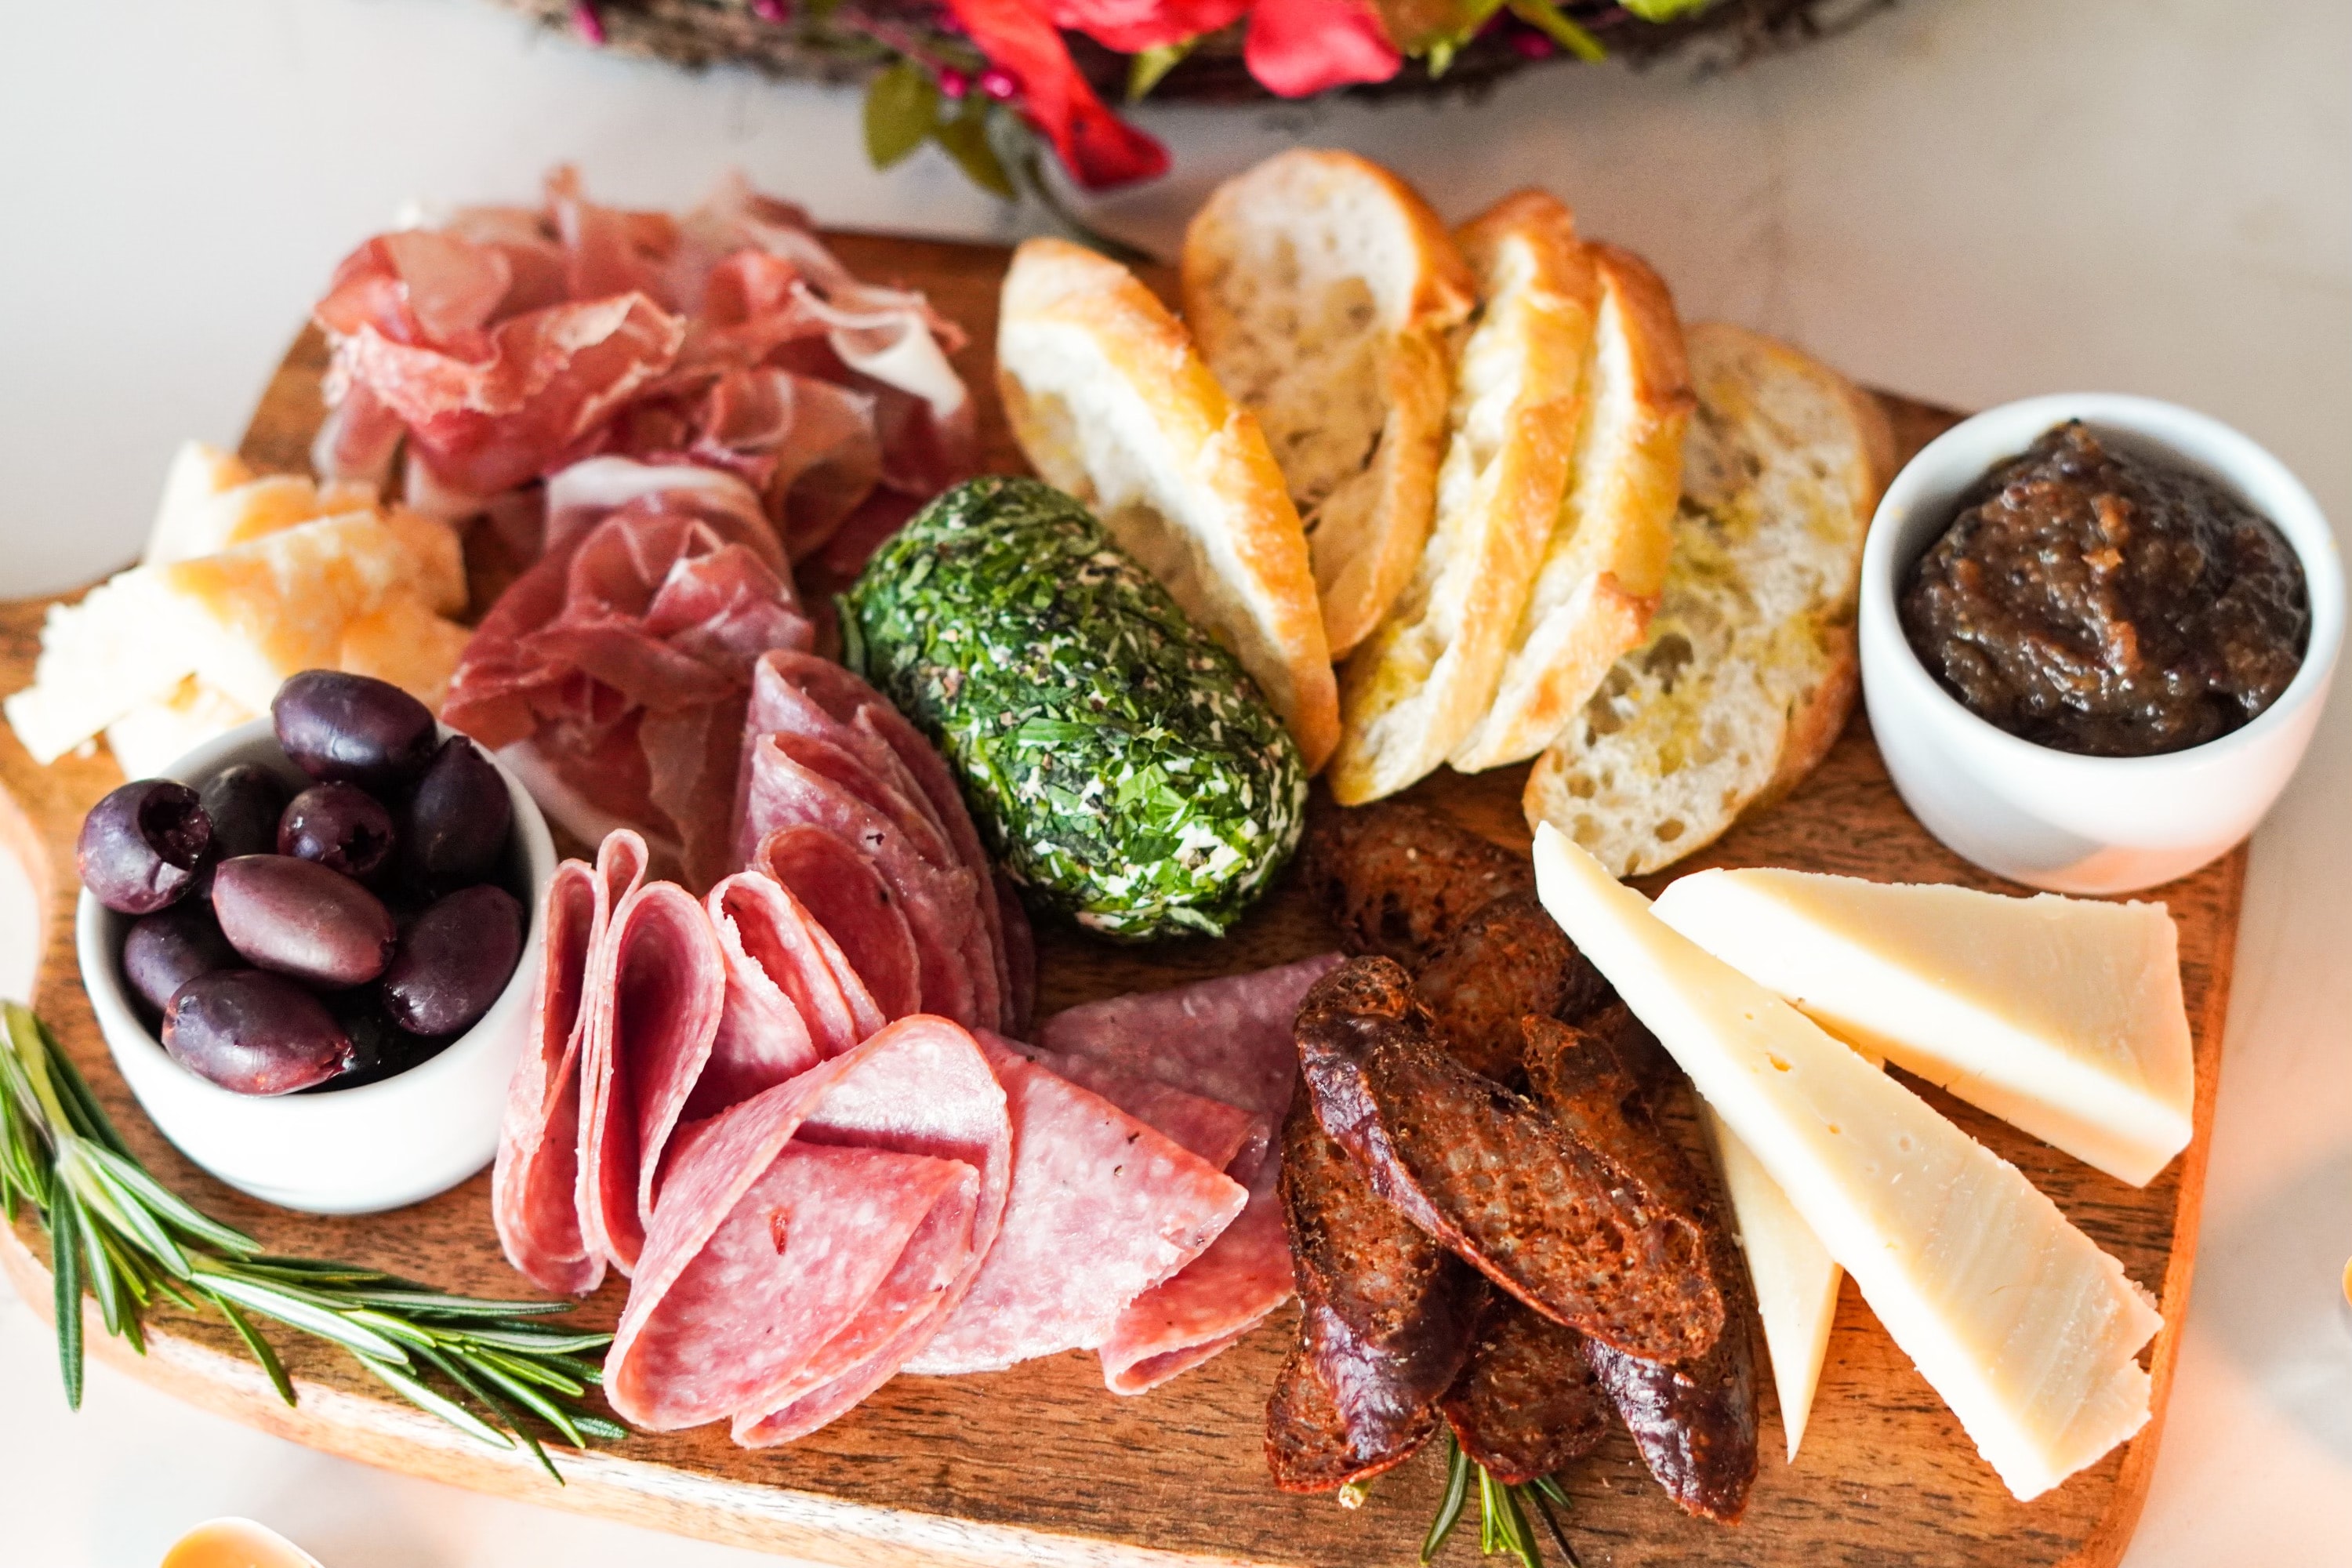 a charcuterie board with baguette slices, meats, cheeses and spreads